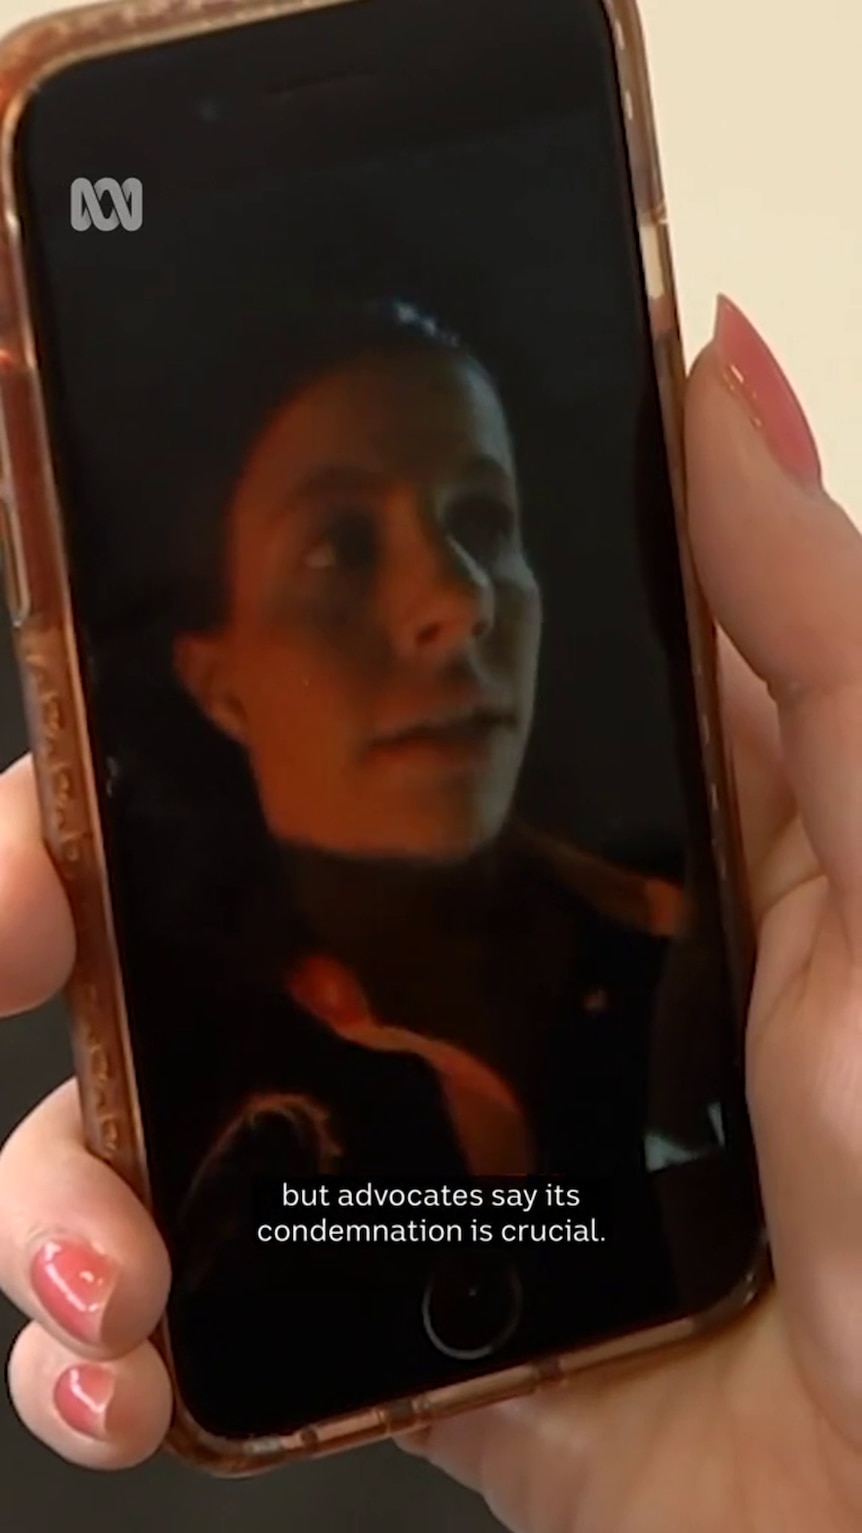 A white person's hand holds a smart phone showing a close-up of a woman's face at night